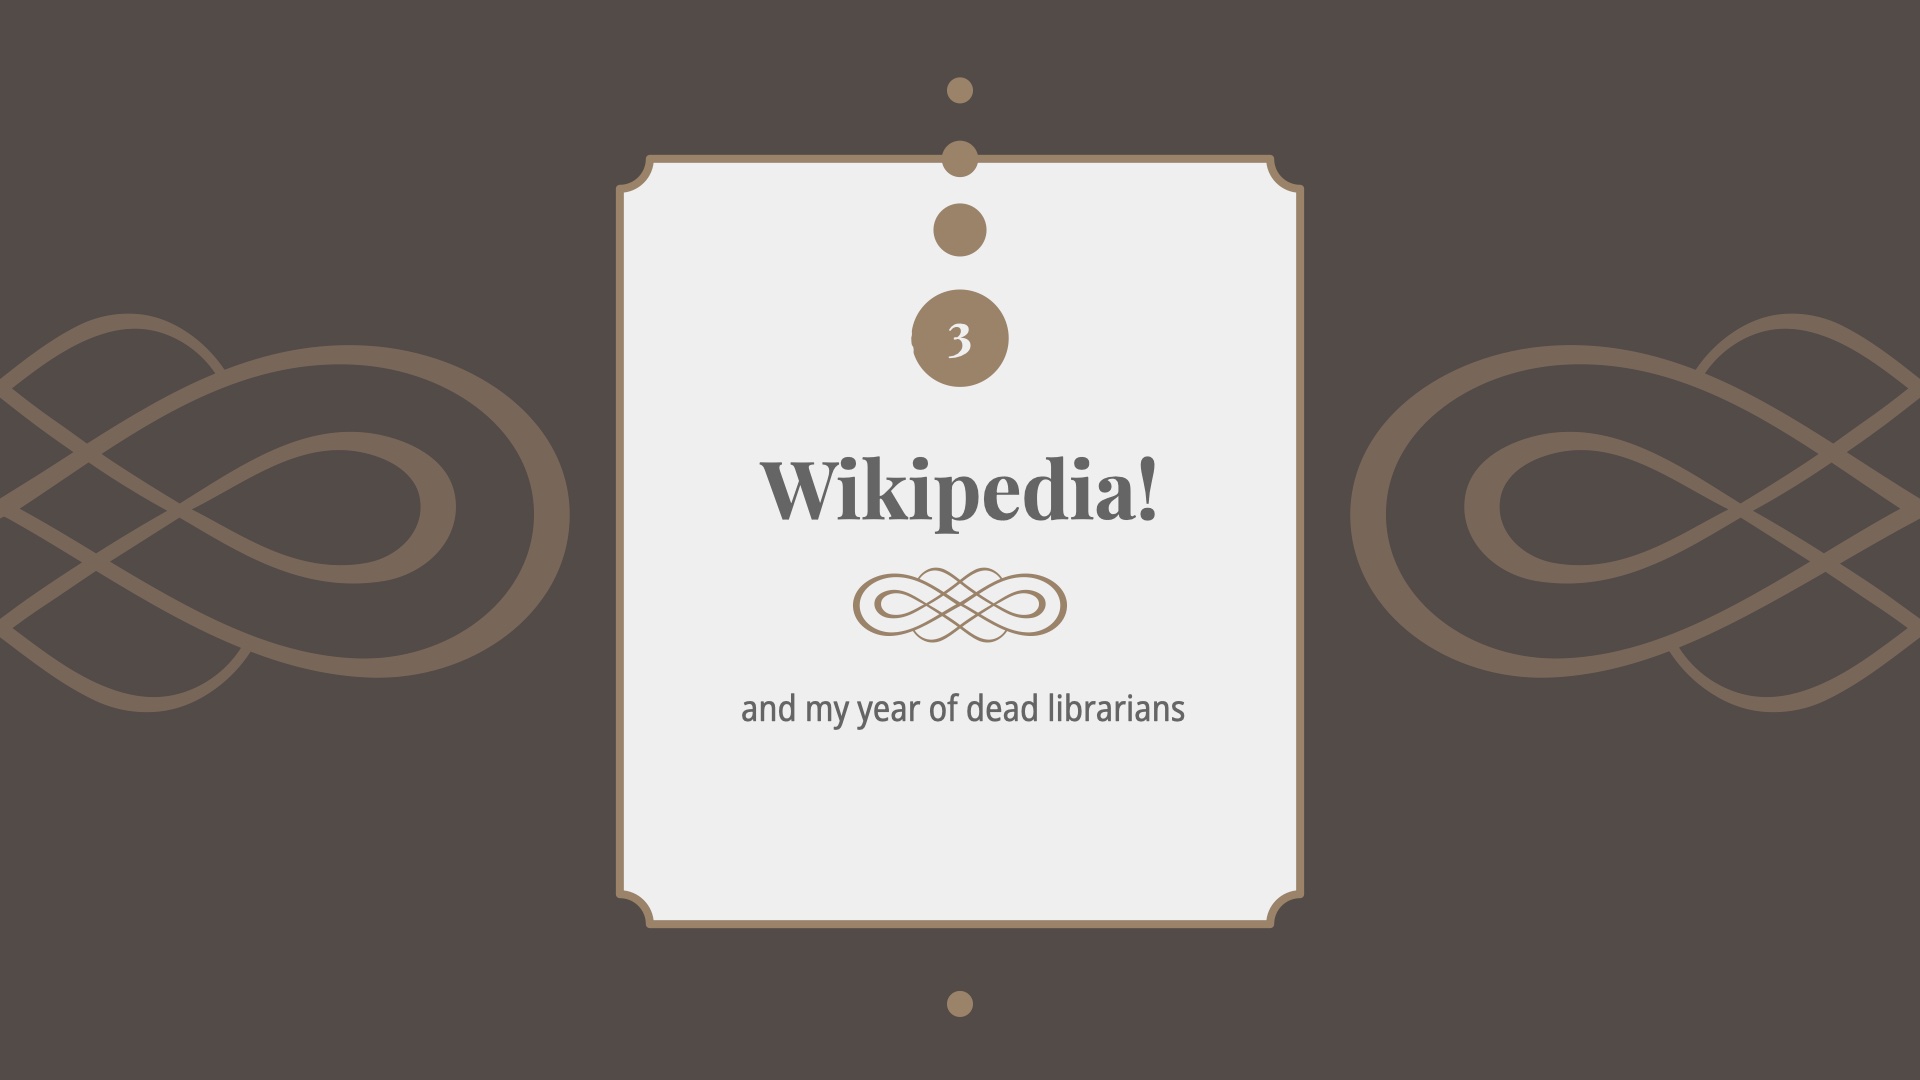 Title card 3: Wikipedia and my year of dead librarians.